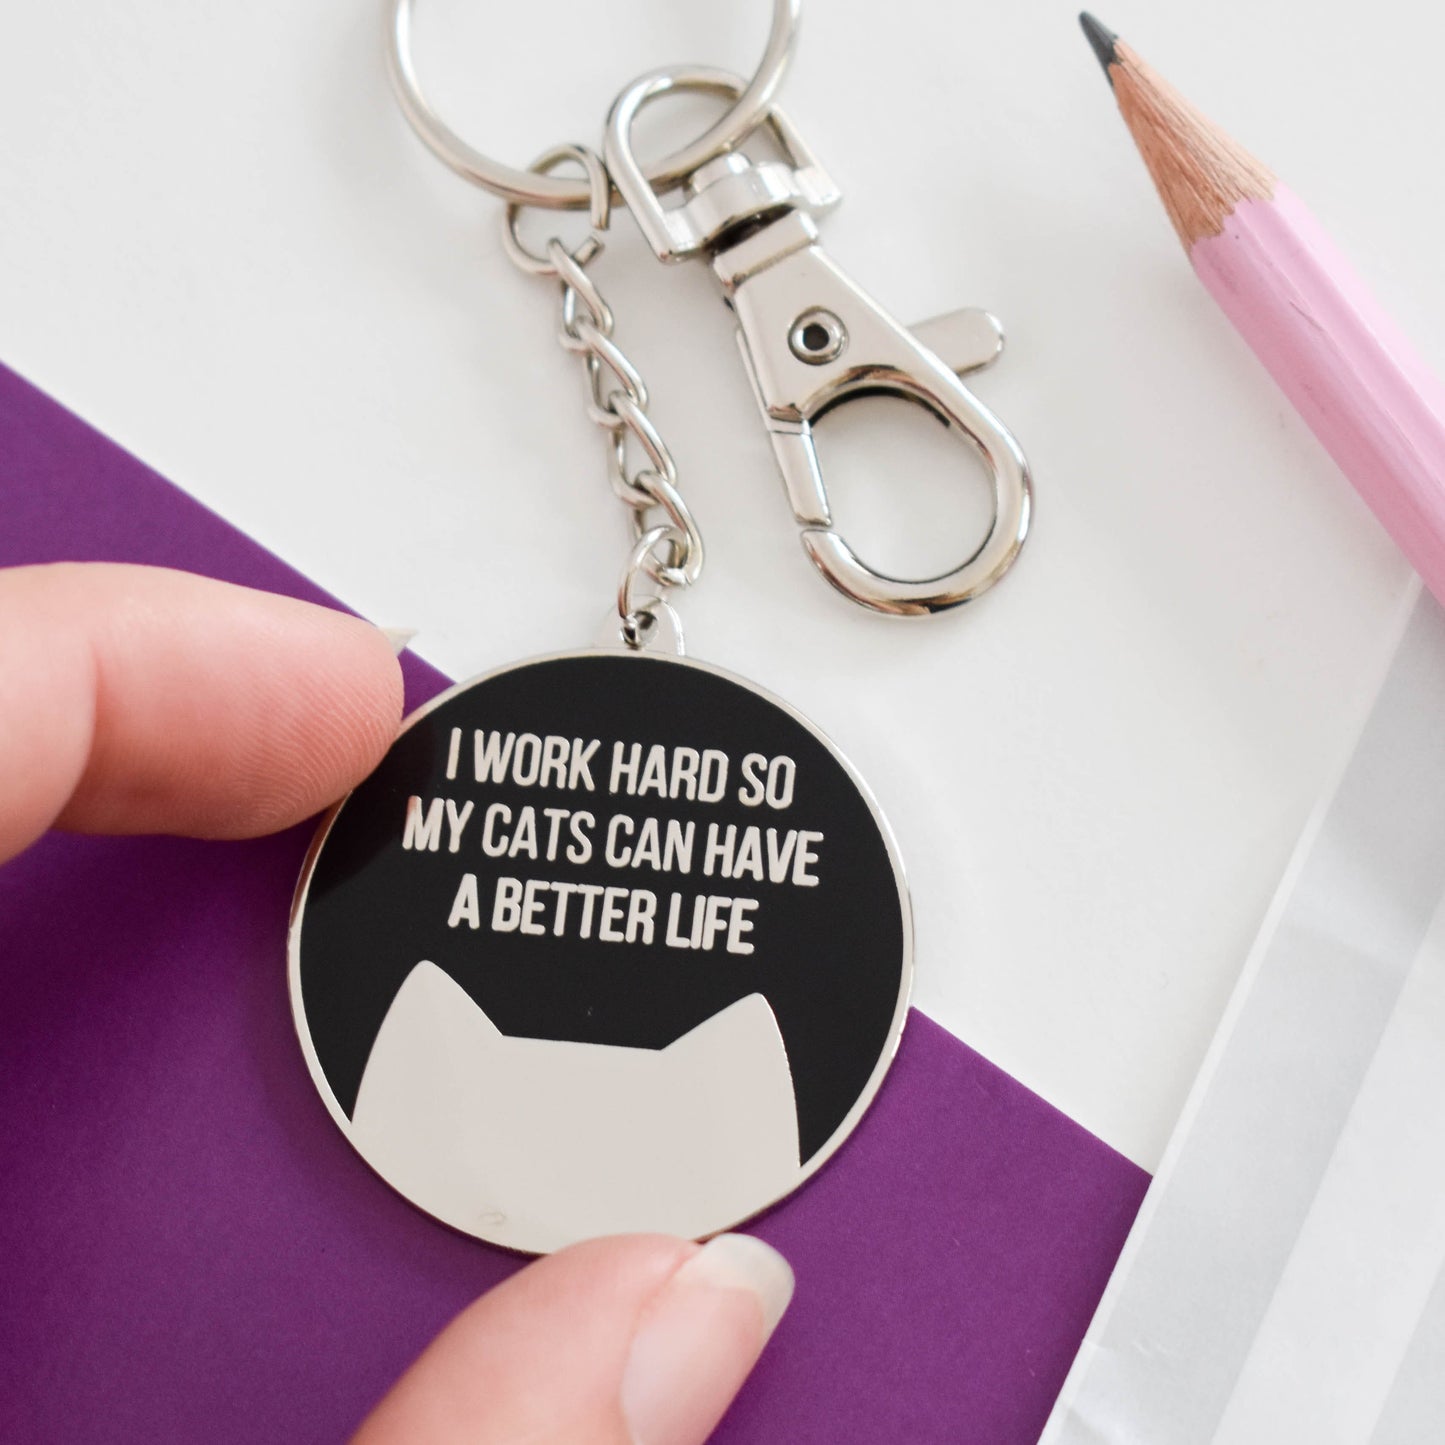 I work hard so my cat can have a better life keyring from Purple Tree Designs